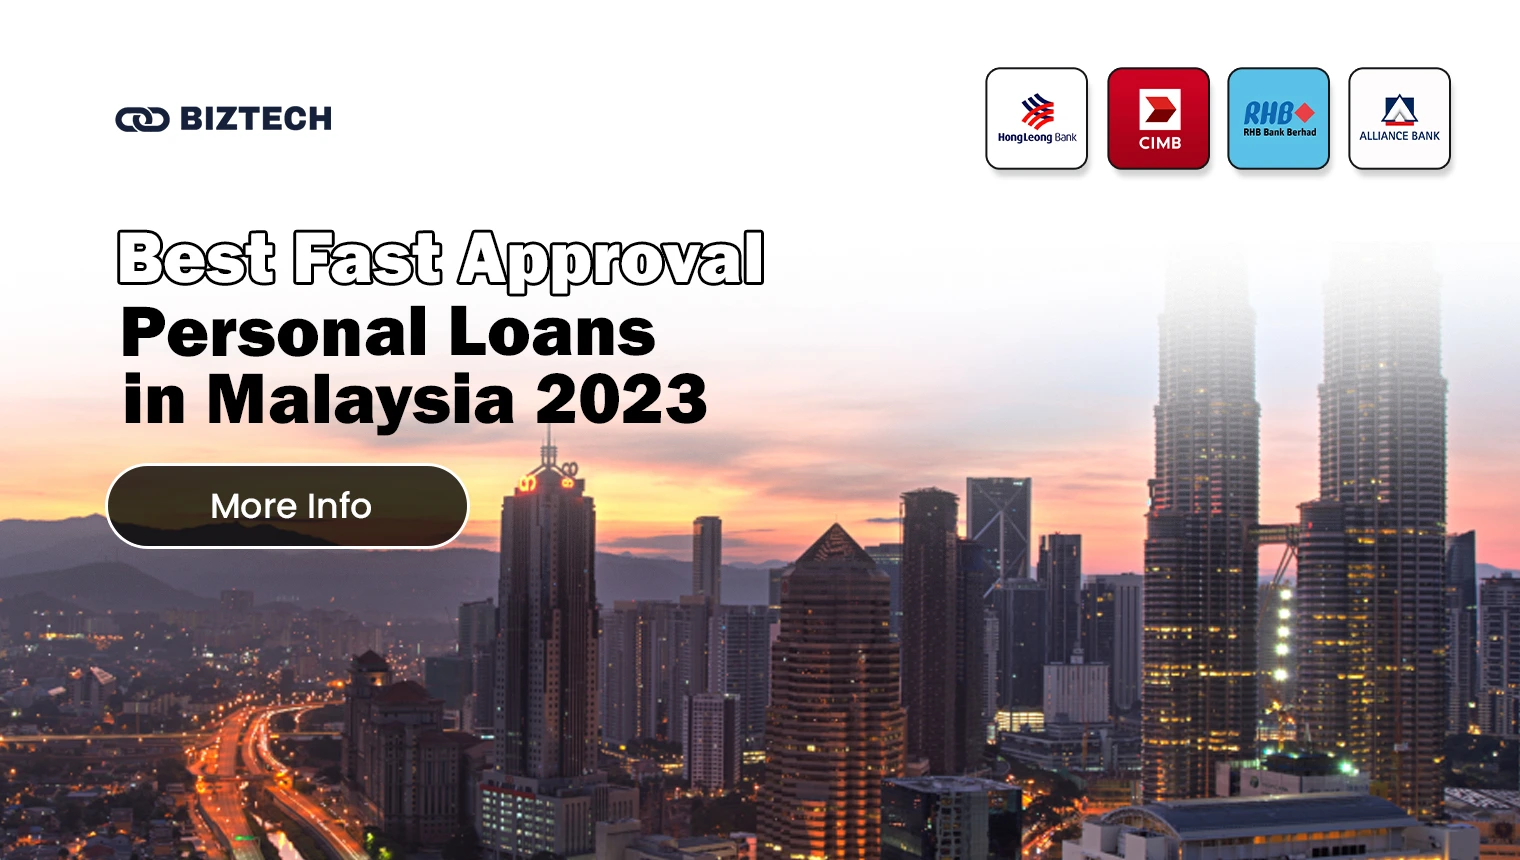 Best Fast Approval Personal Loans in Malaysia 2023